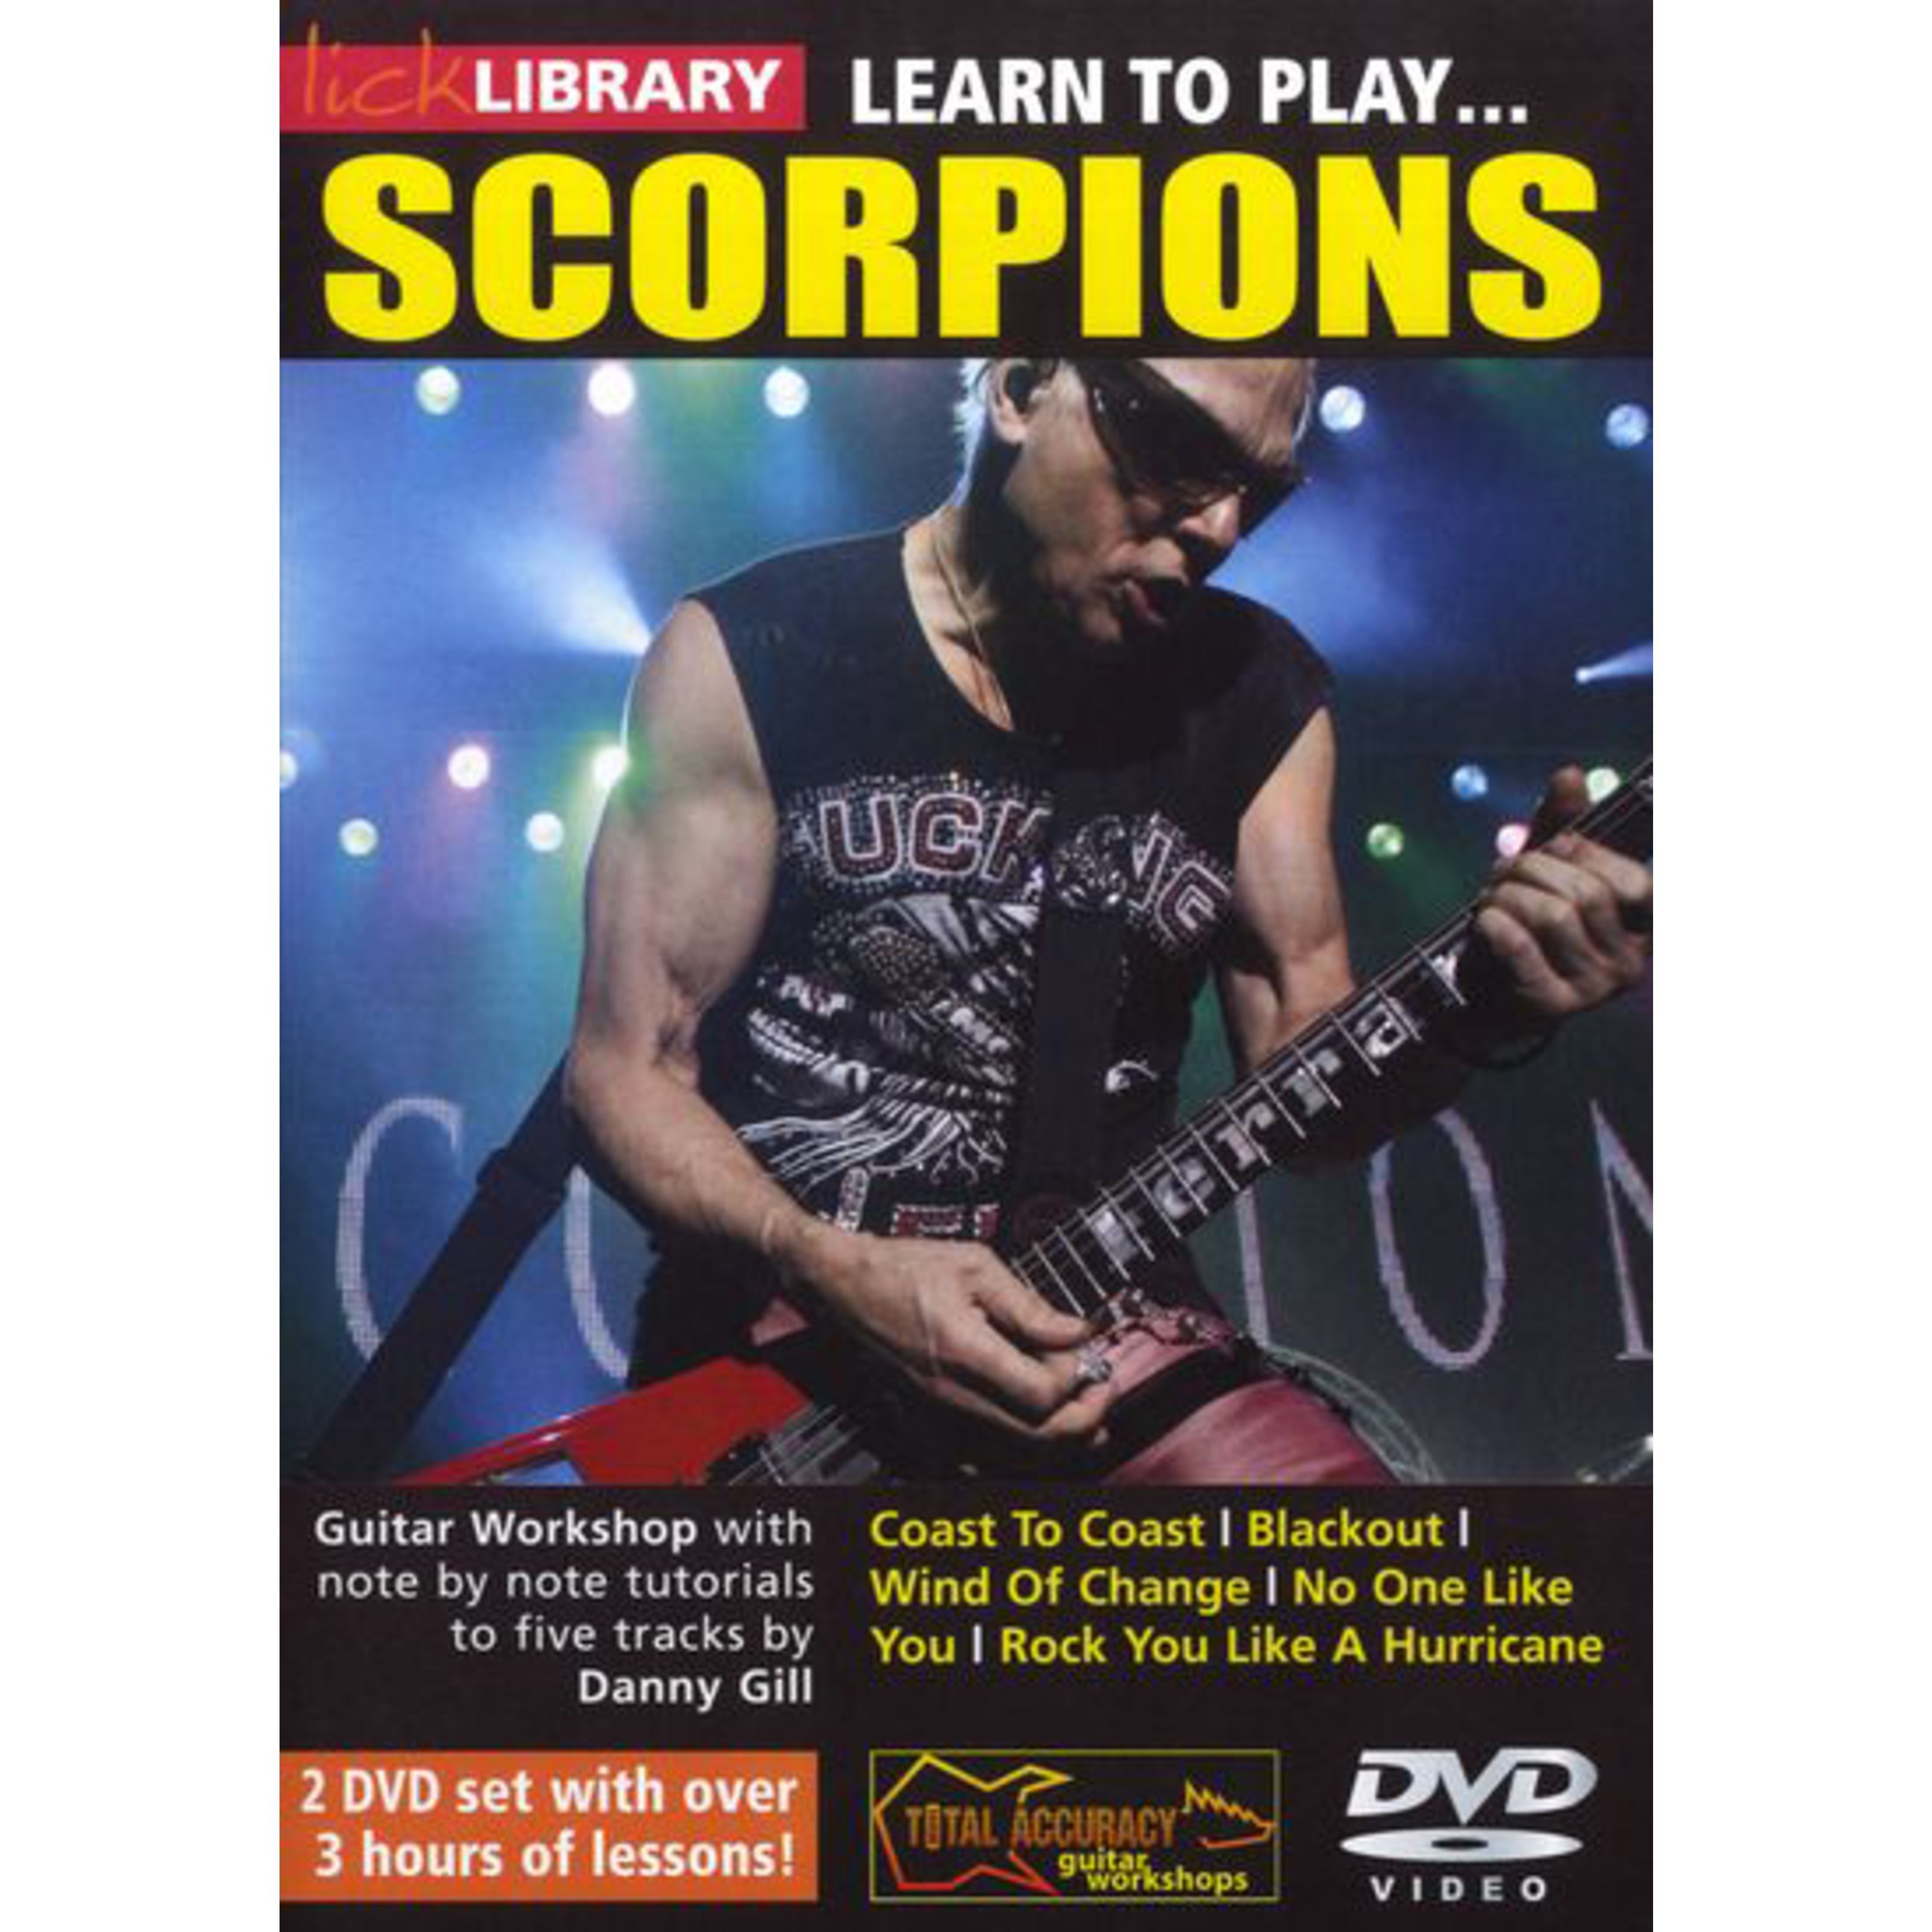 Roadrock International Lick Library: Learn To Play Scorpions DVD - DVD